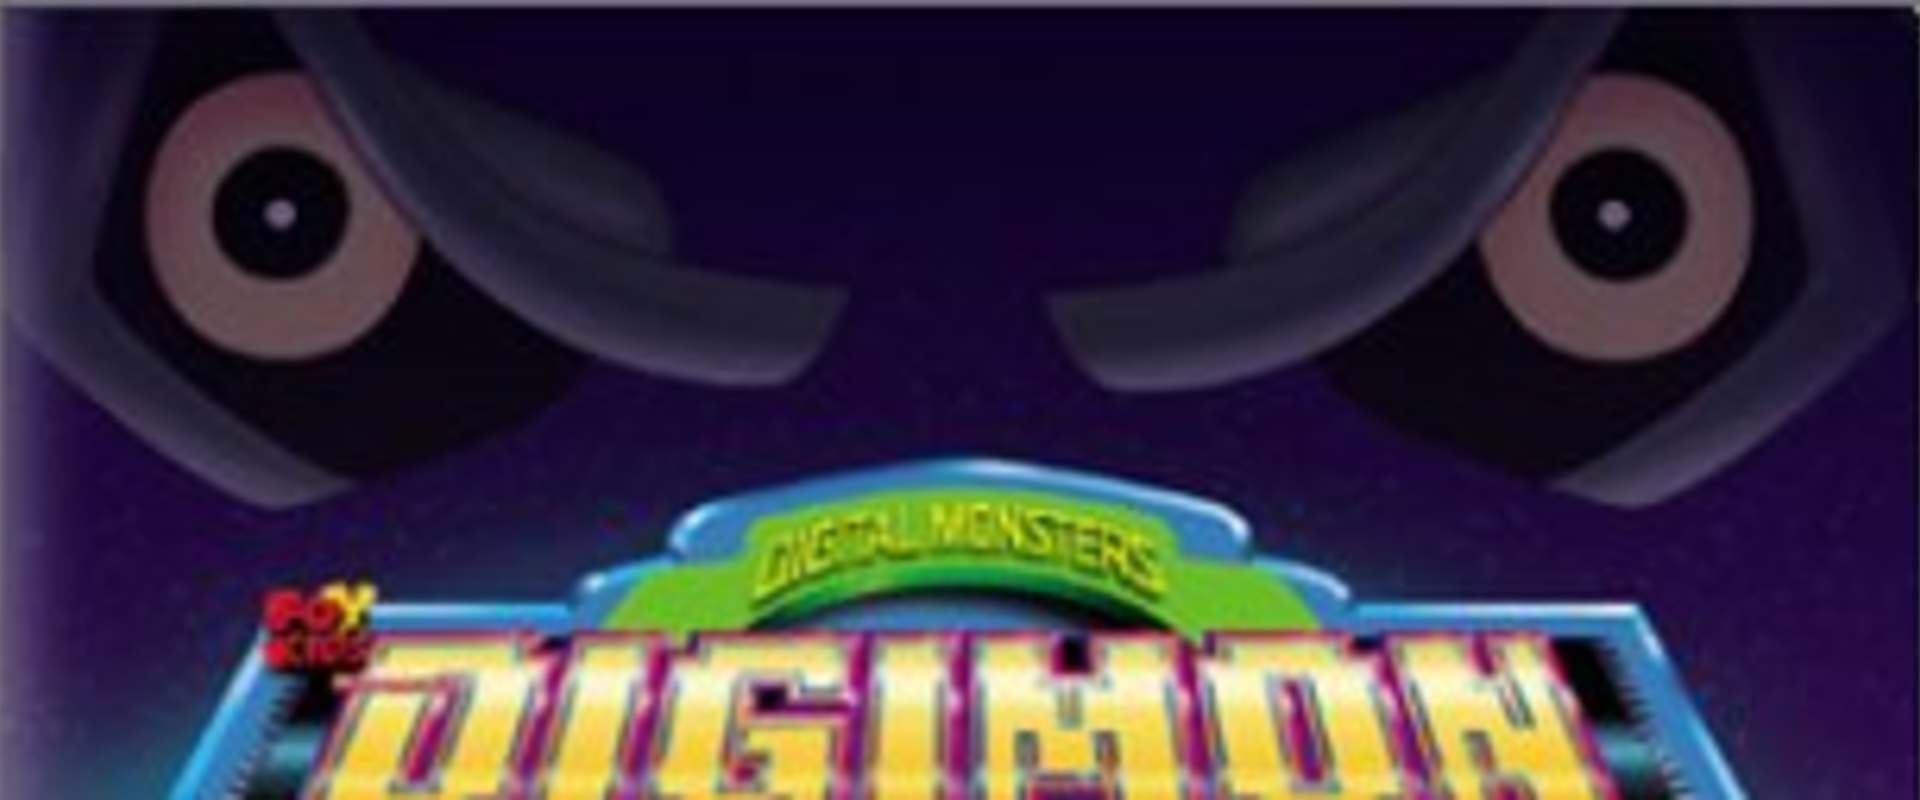 Digimon: The Movie background 1